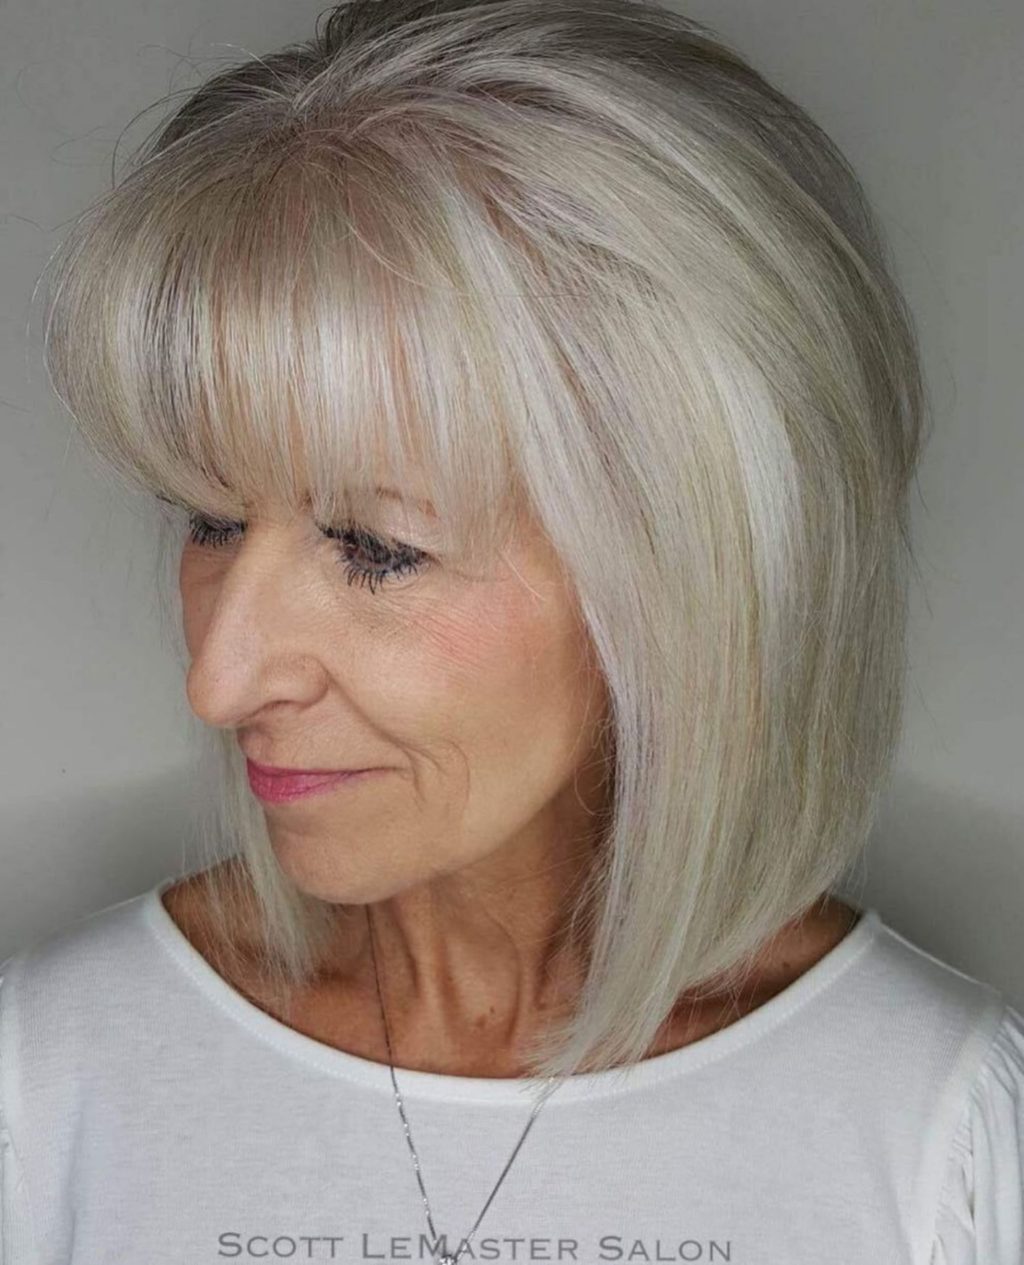 Angled Bangs 32 Amazing Hairstyles for Women Over 60 to Look Younger - 10